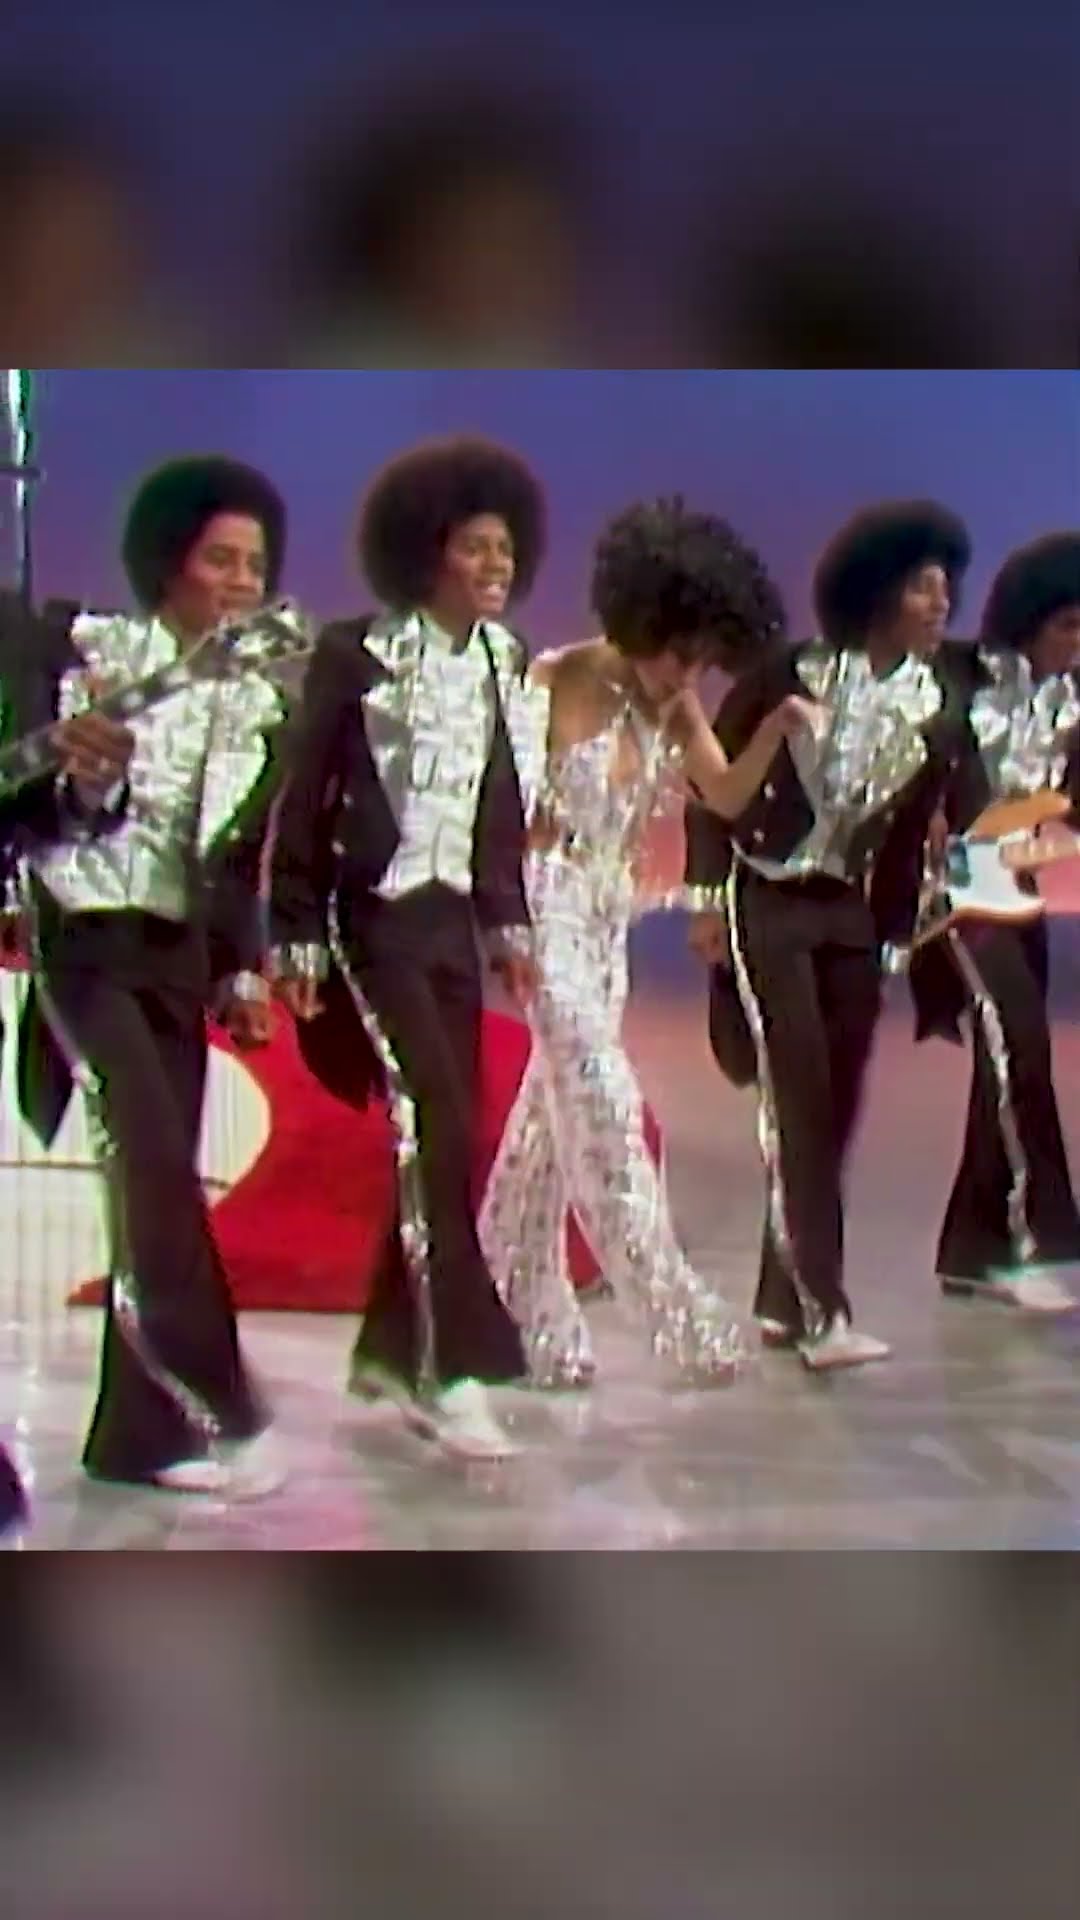 Can You Feel It - The Jacksons